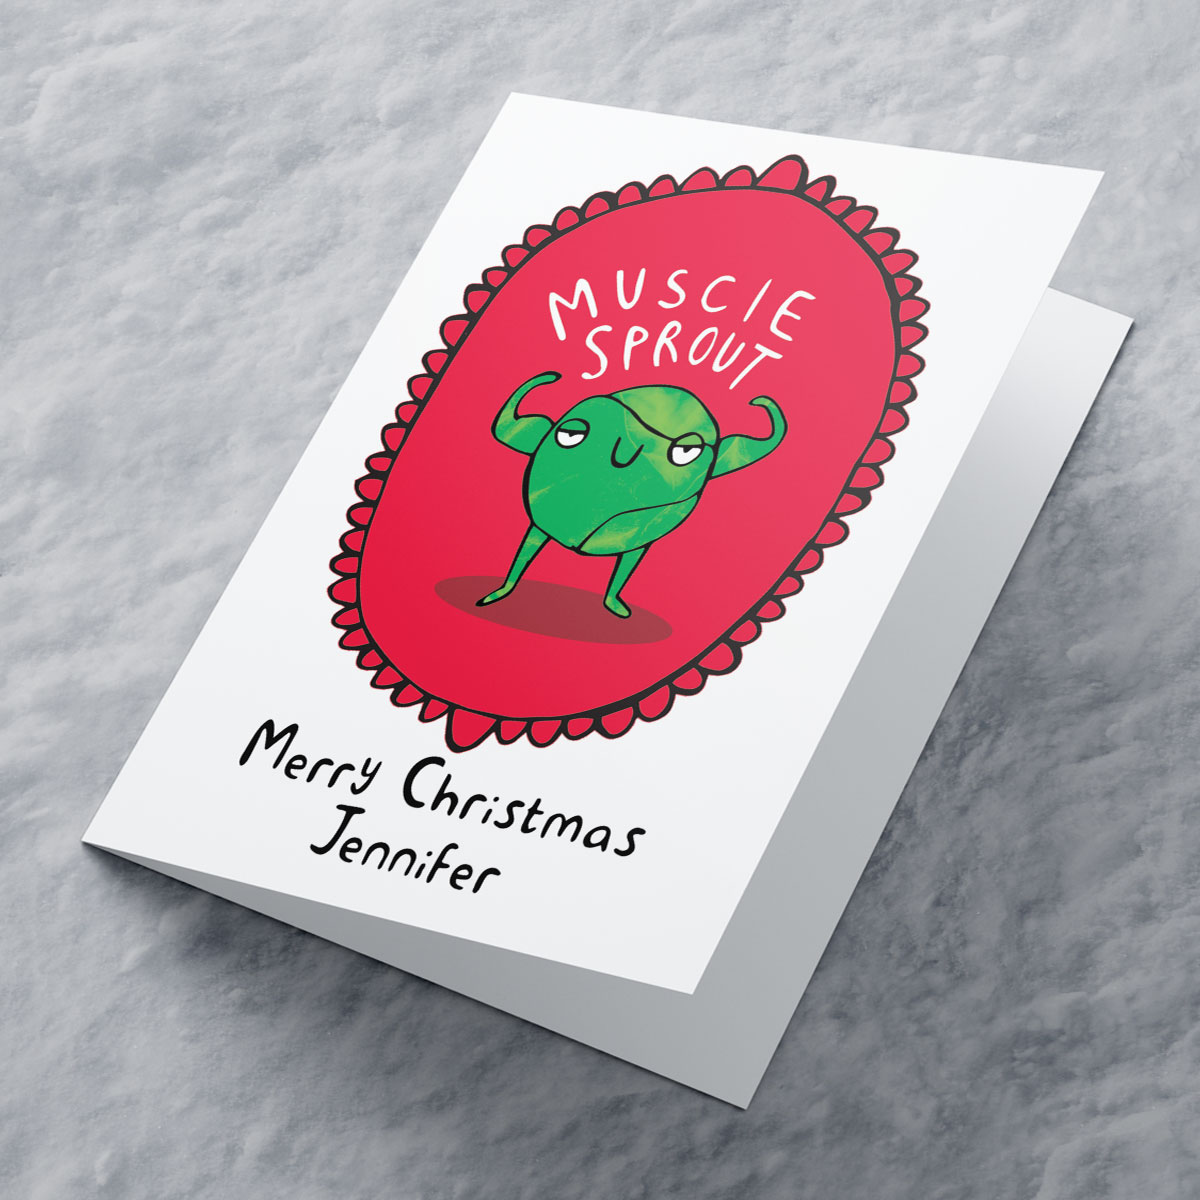 Personalised Katie Abey Christmas Card - Muscle Sprout